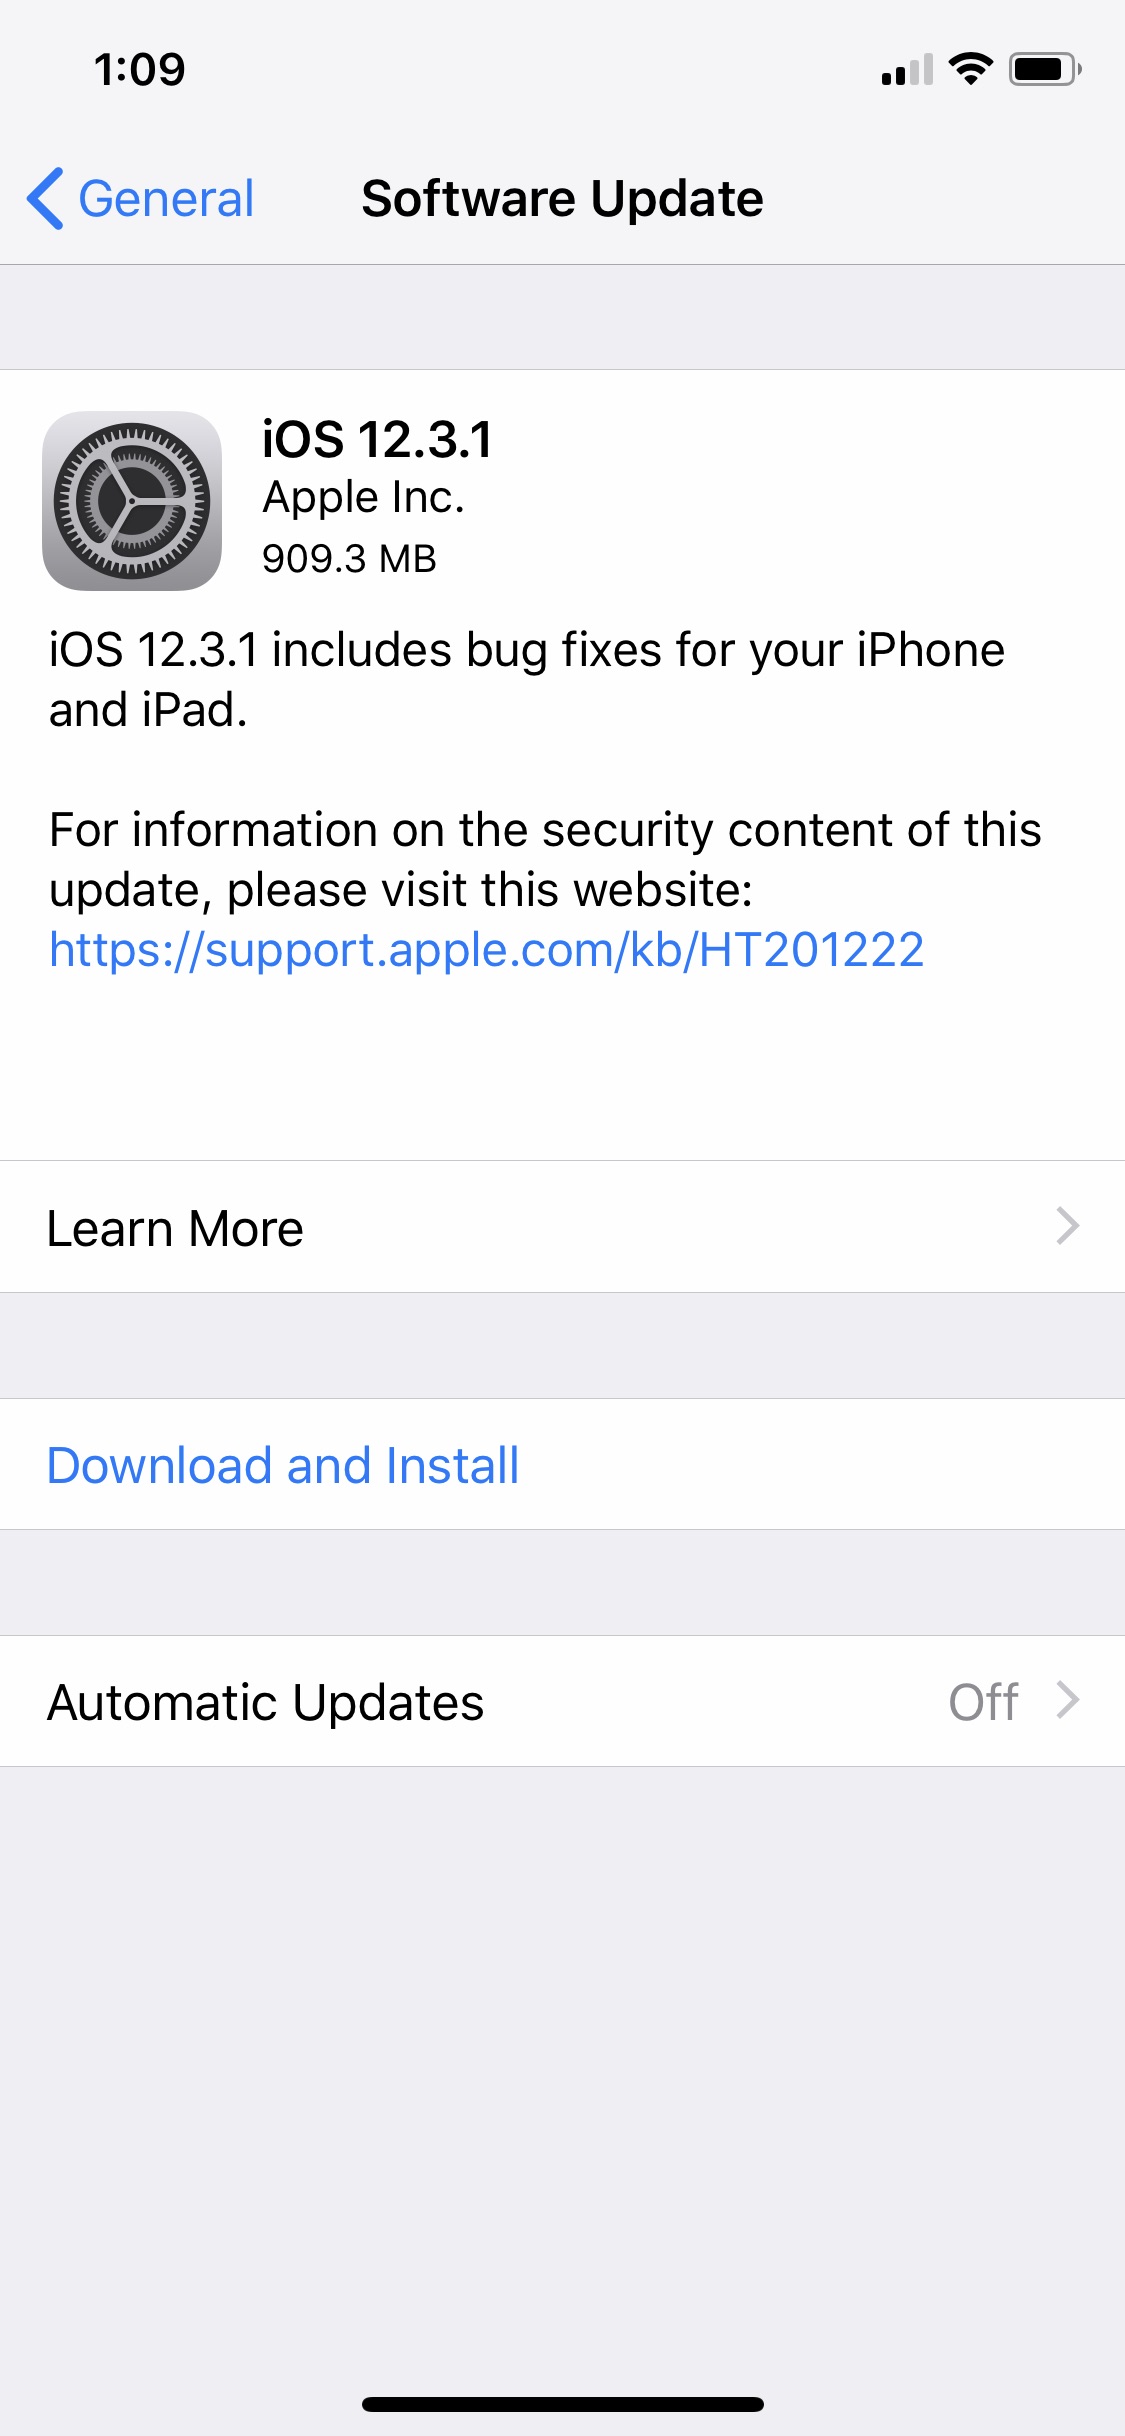 Apple Releases iOS 12.3.1 With Fixes for VoLTE, Messages [Download]